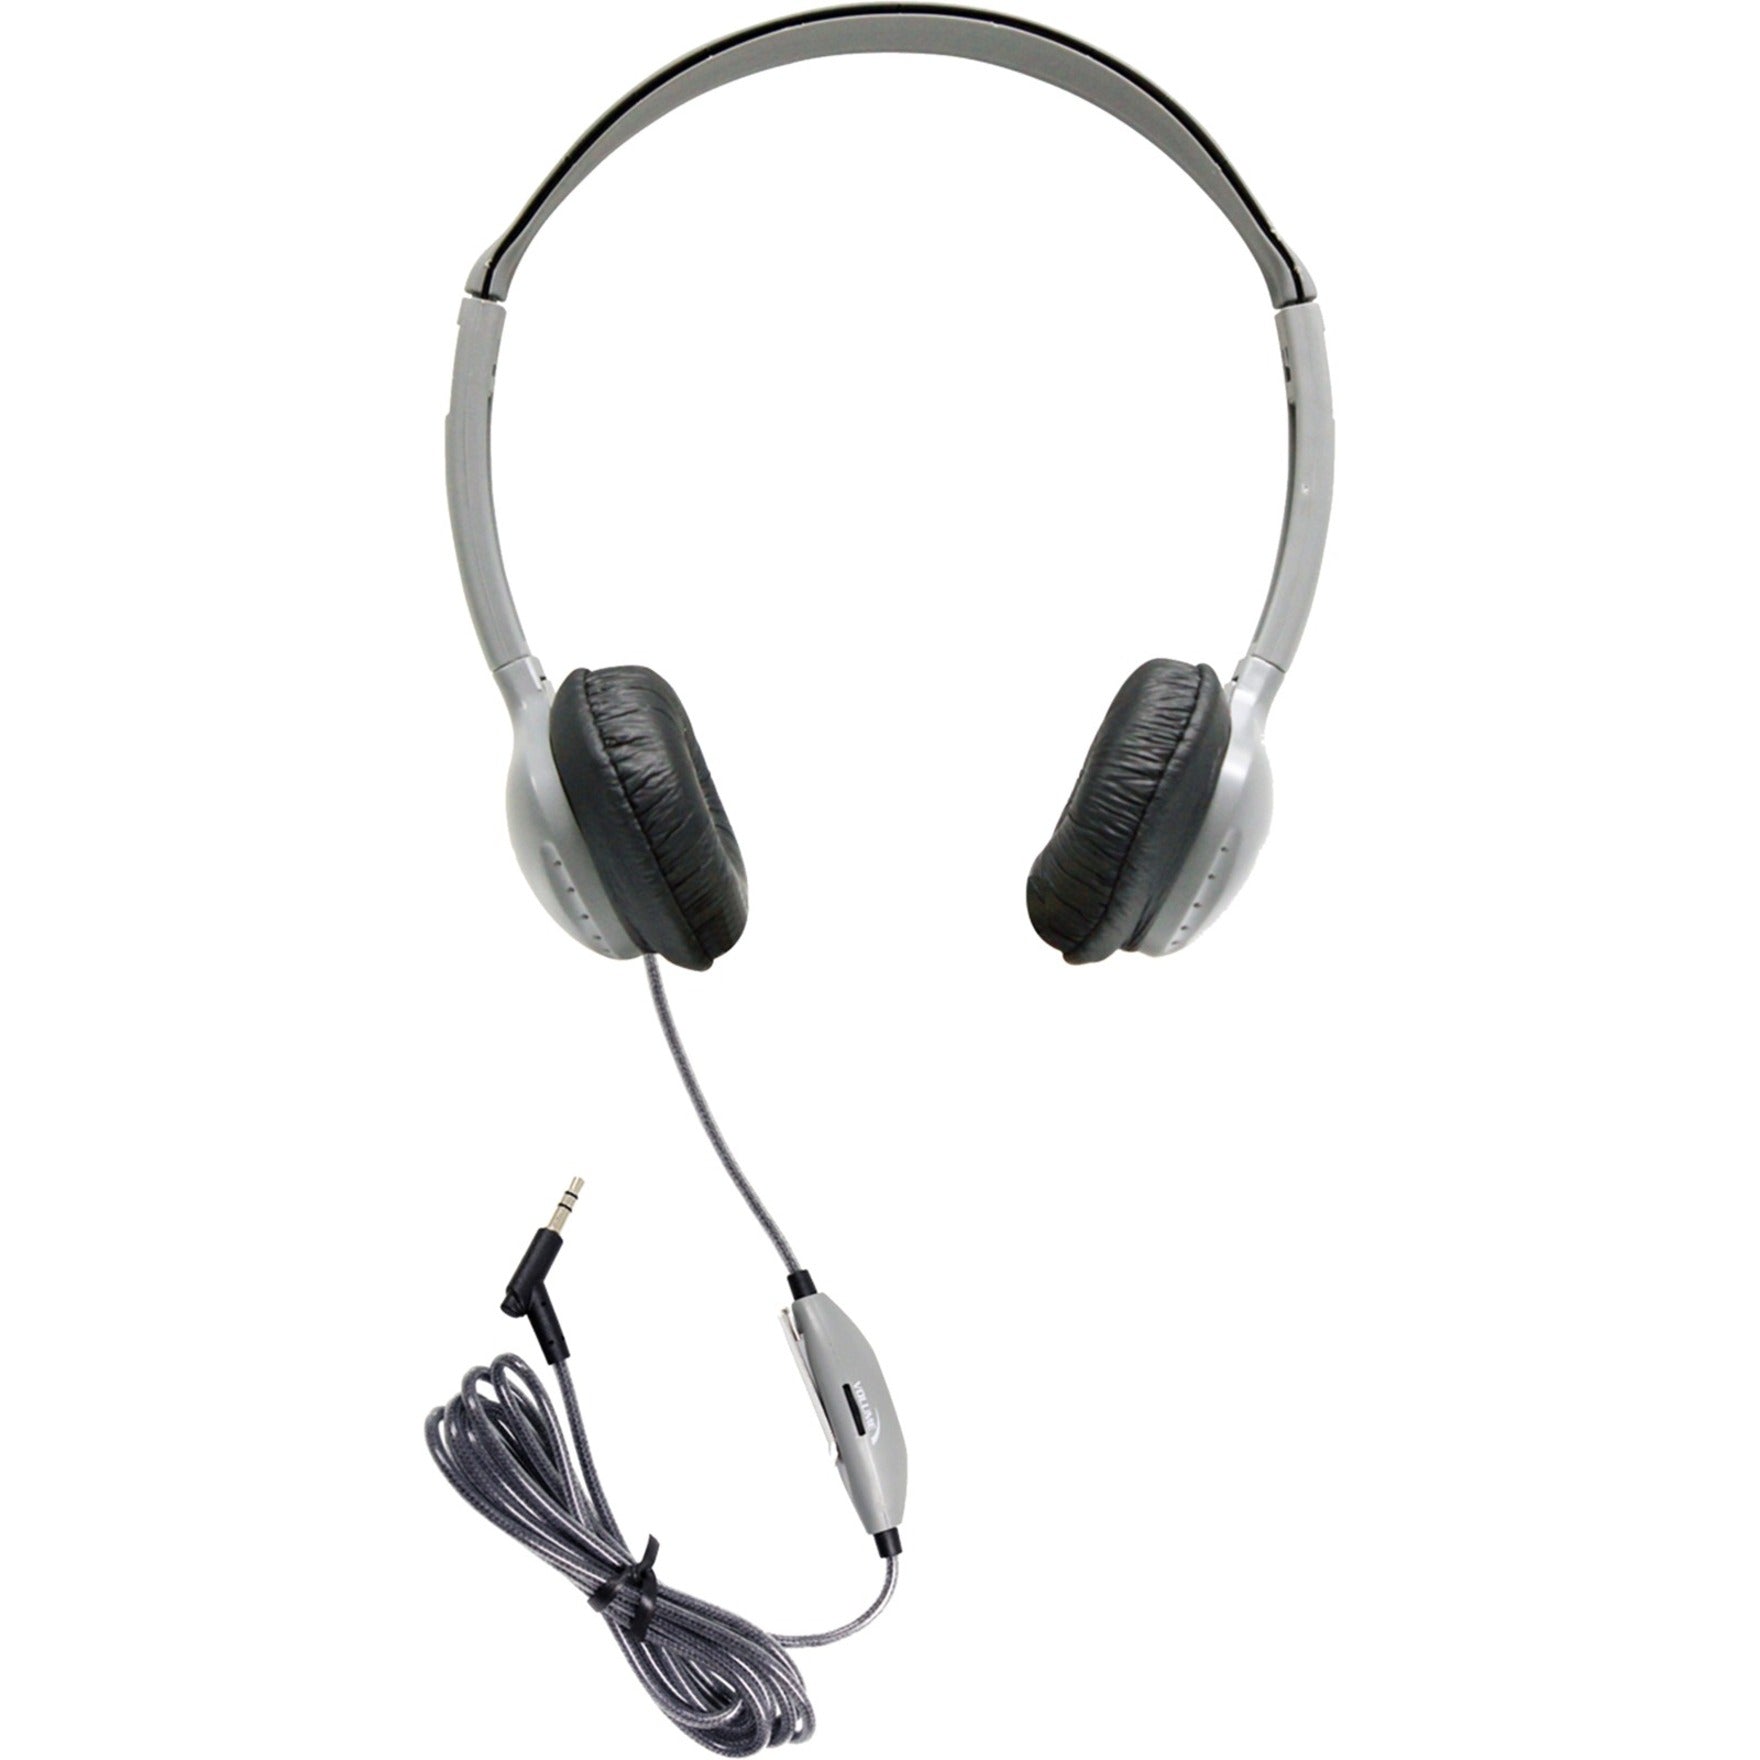 Hamilton Buhl MS2LV SchoolMate Personal Stereo Headphone with in-line Volume, Leatherette - Rugged, Tangle-free Cable, Durable, Lightweight